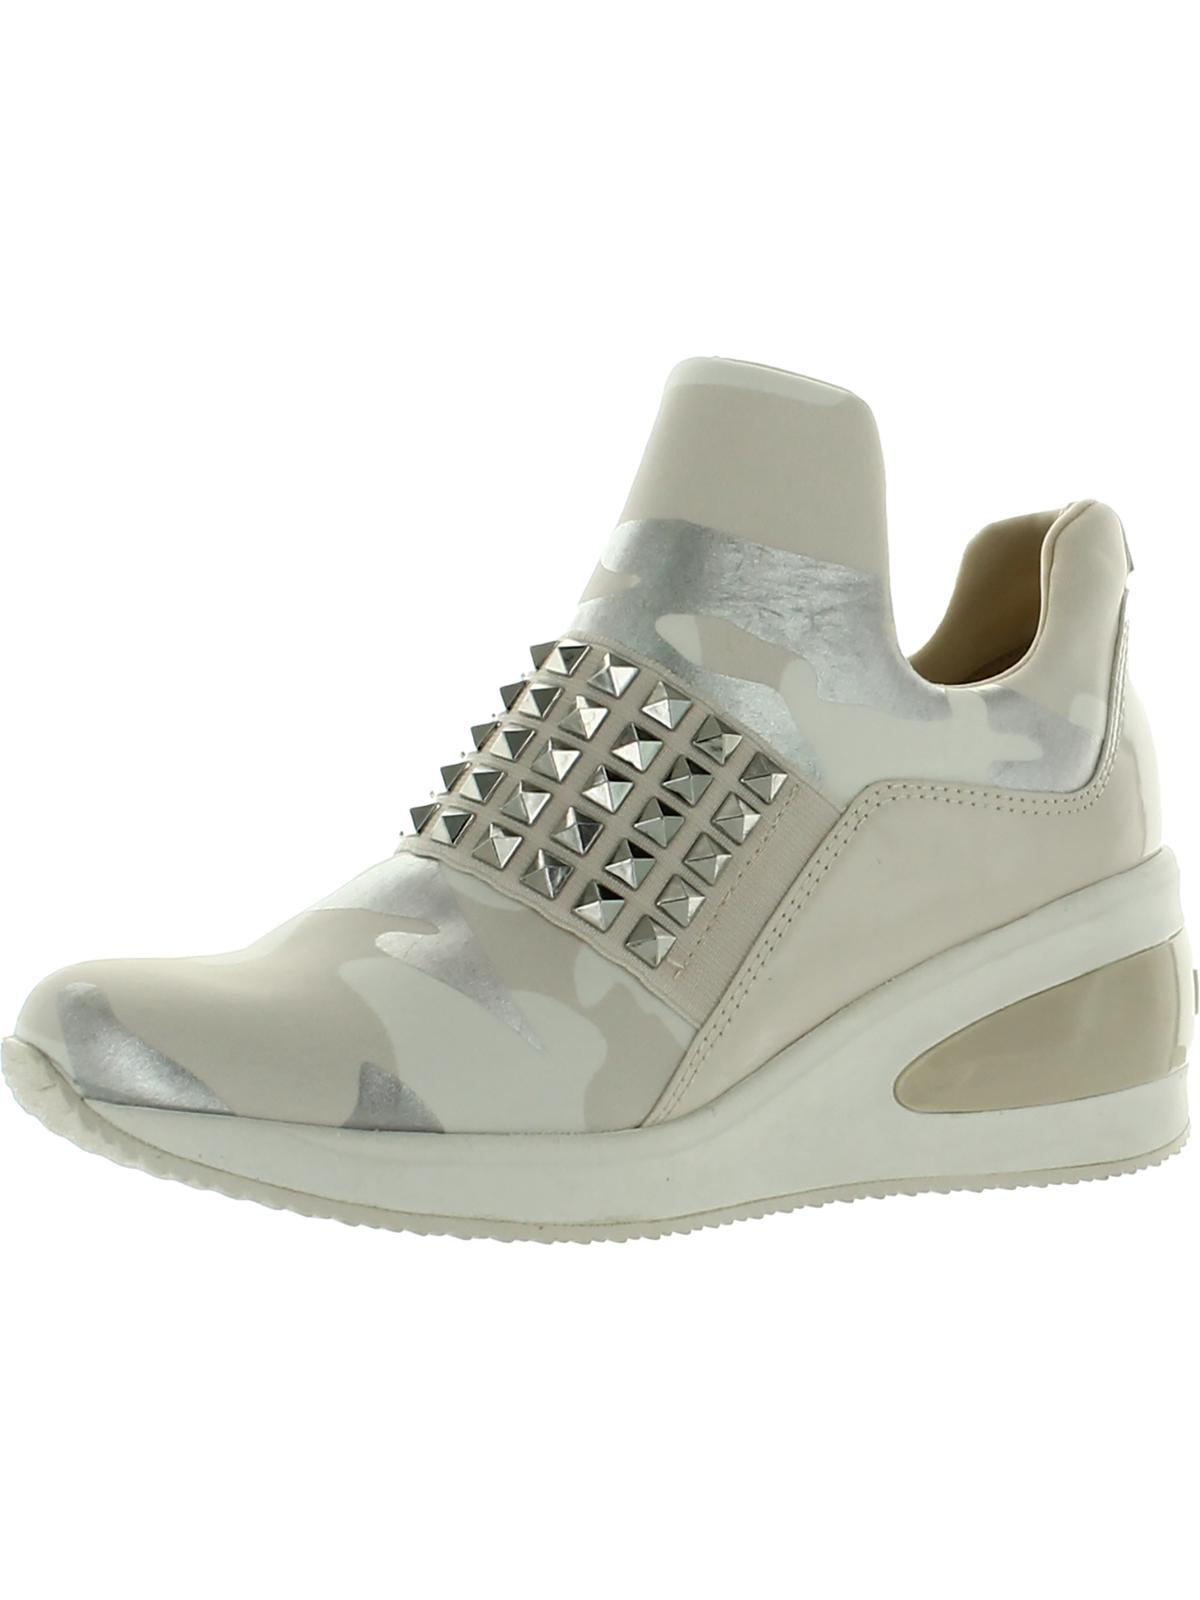 DKNY Borg Studded Camo Casual And Fashion Sneakers | Lyst